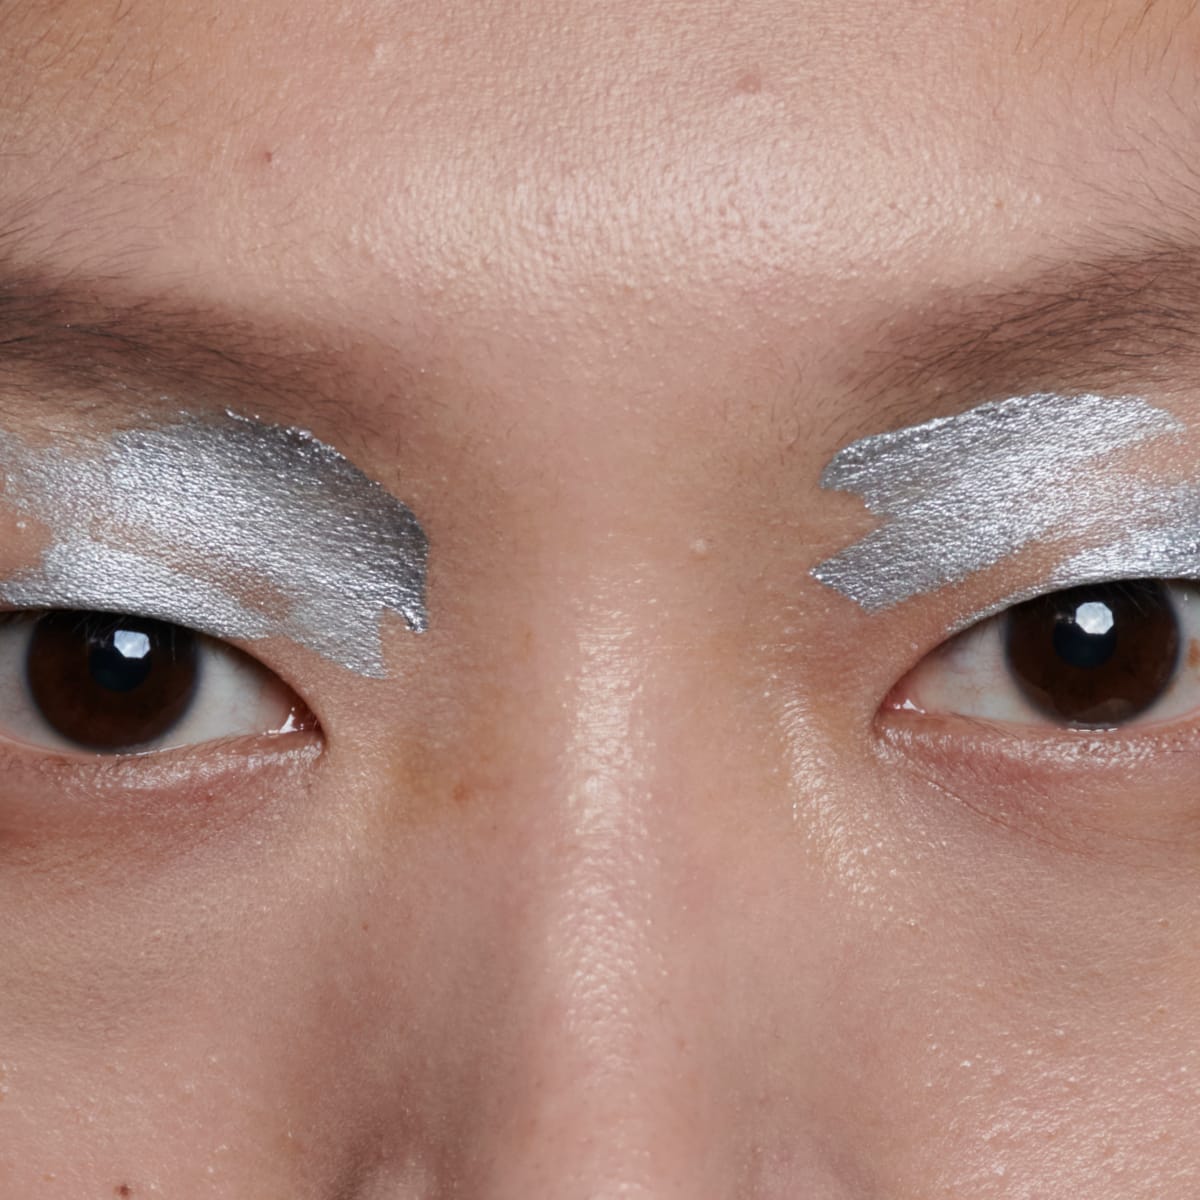 Emo Eye Makeup Looks Are Seeing a Revival on the Spring 2023 Runways -  Fashionista